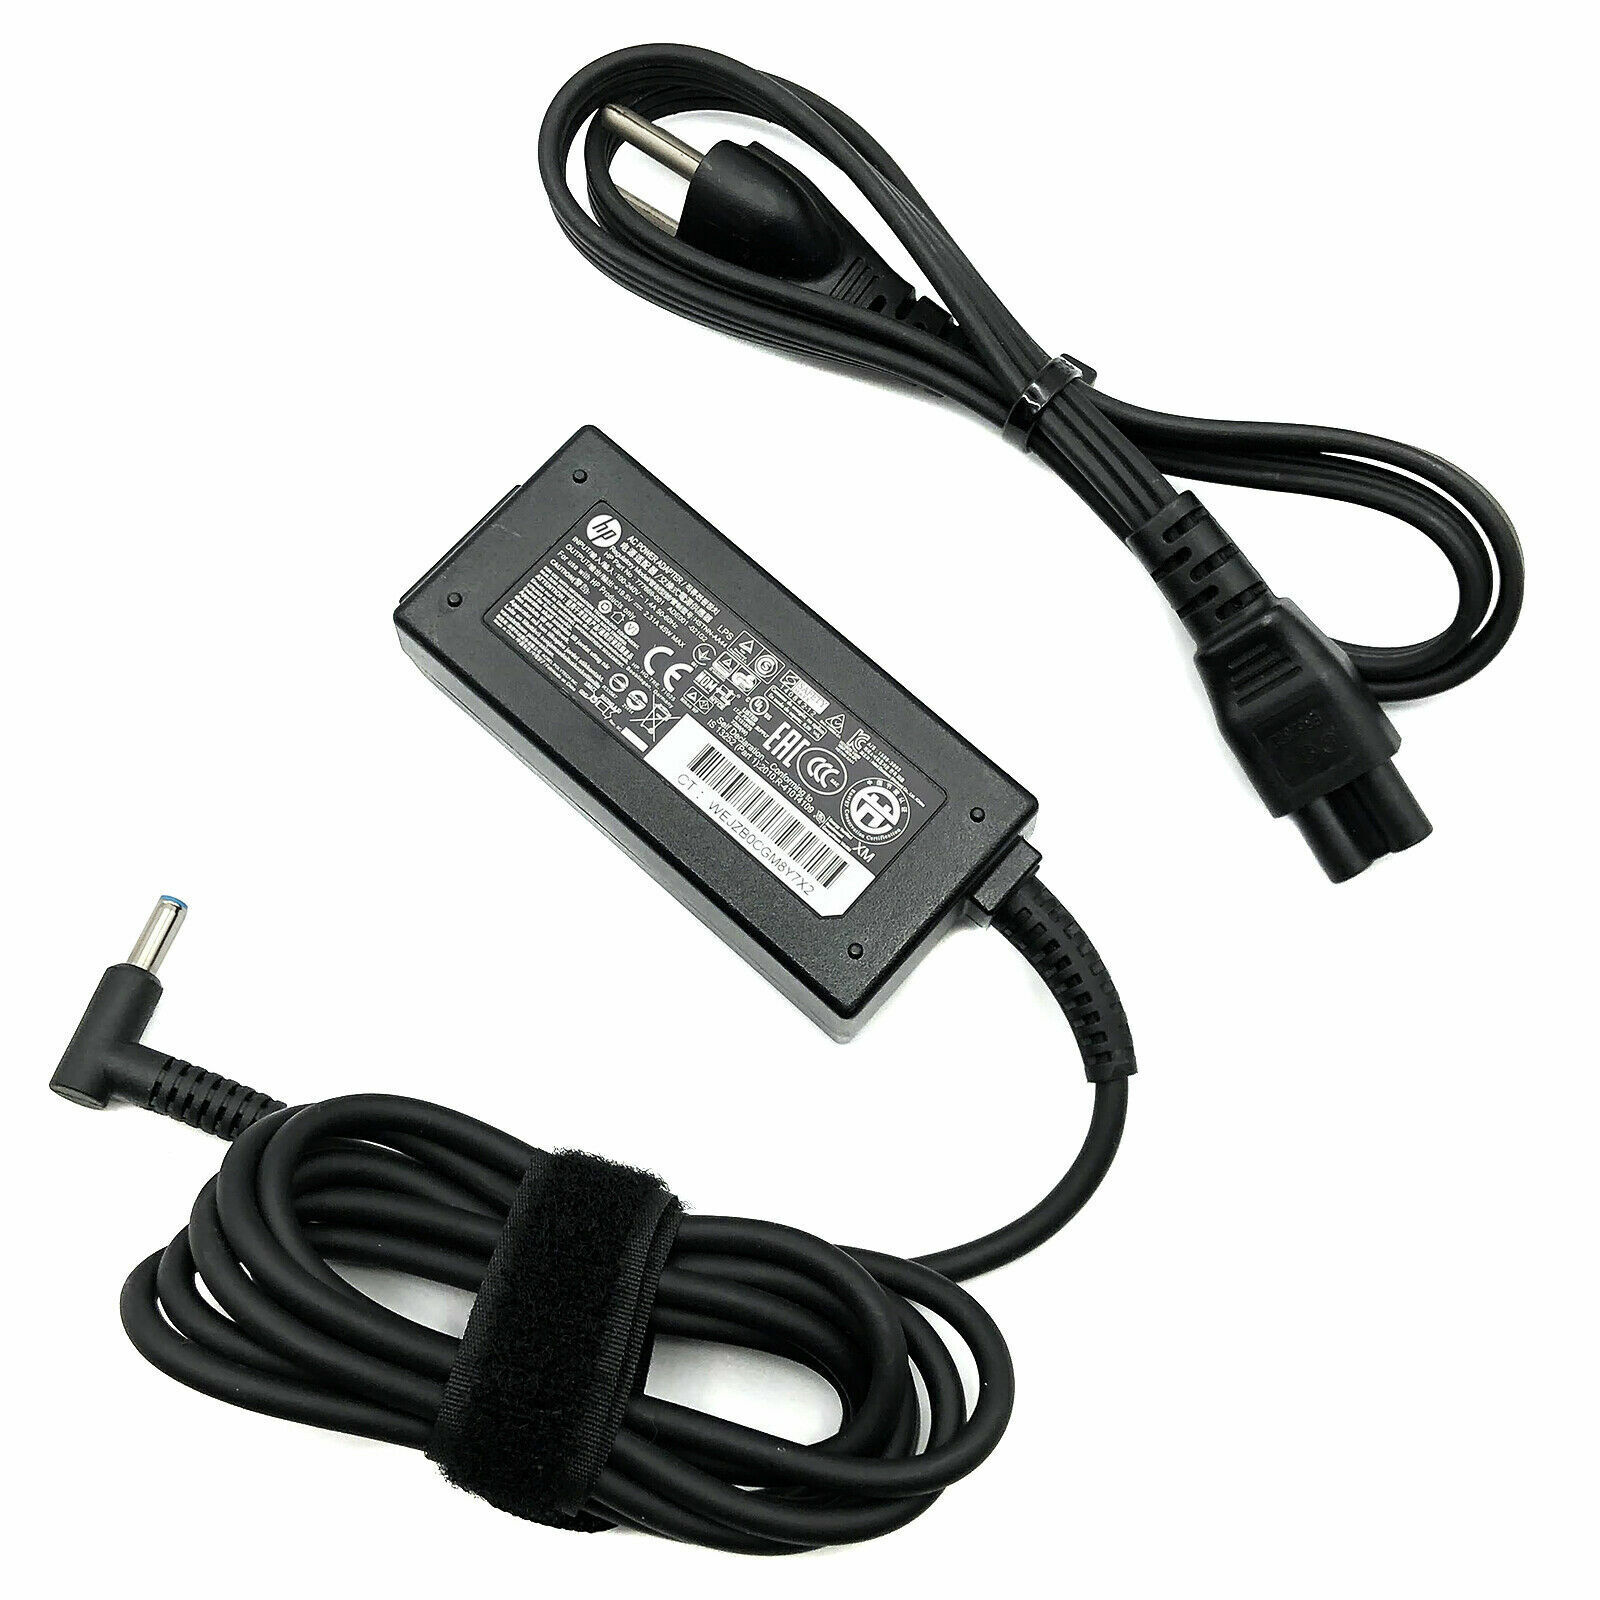 Genuine 45W HP Adapter for Notebook PC Laptop 15- Series Look Variations w/Cord